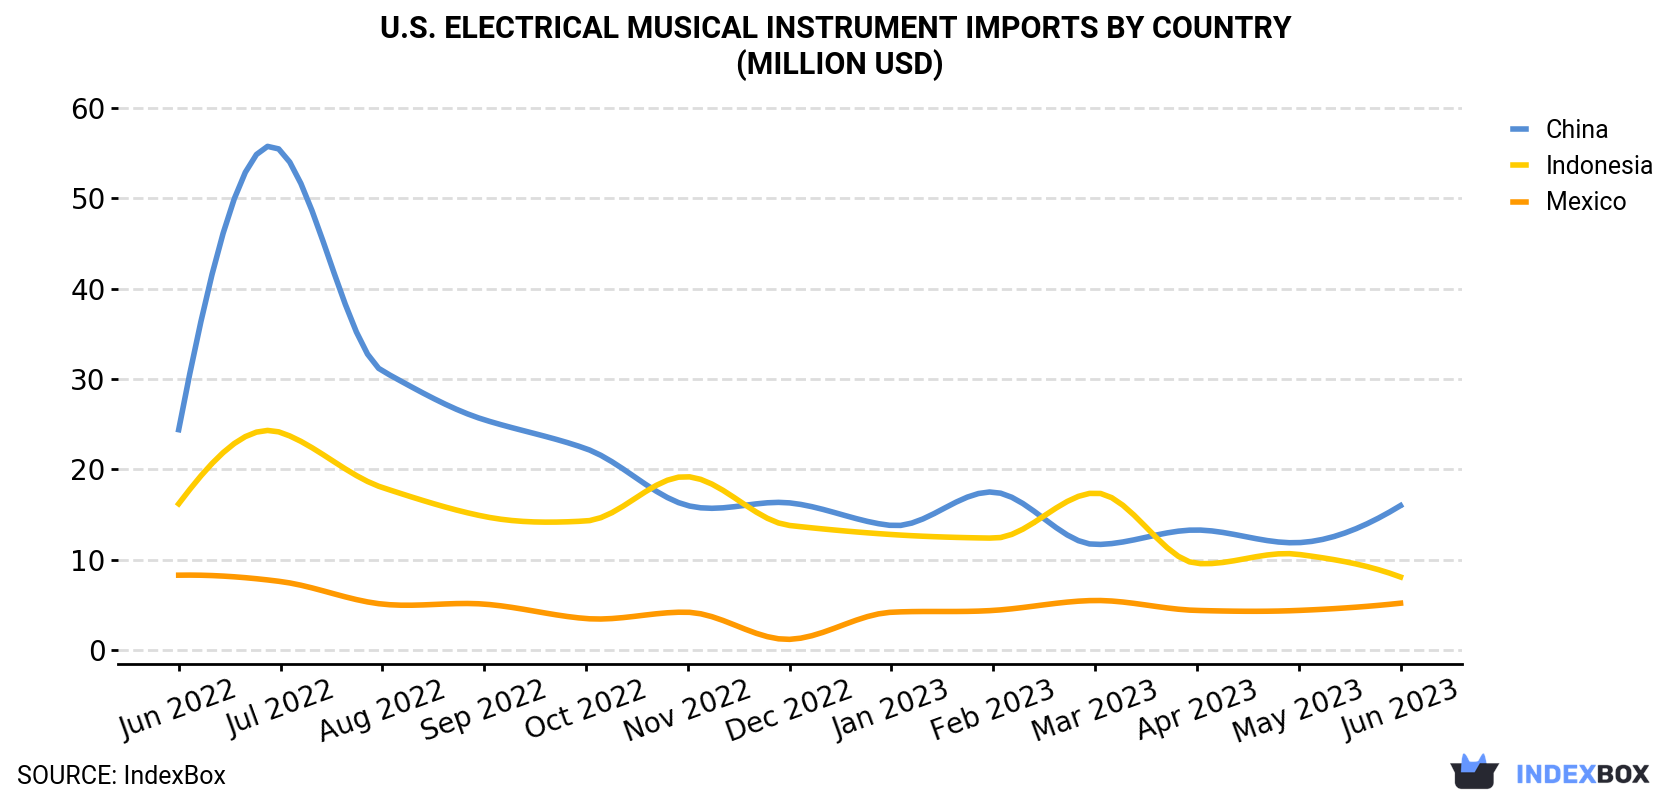 U.S. Electrical Musical Instrument Imports By Country (Million USD)